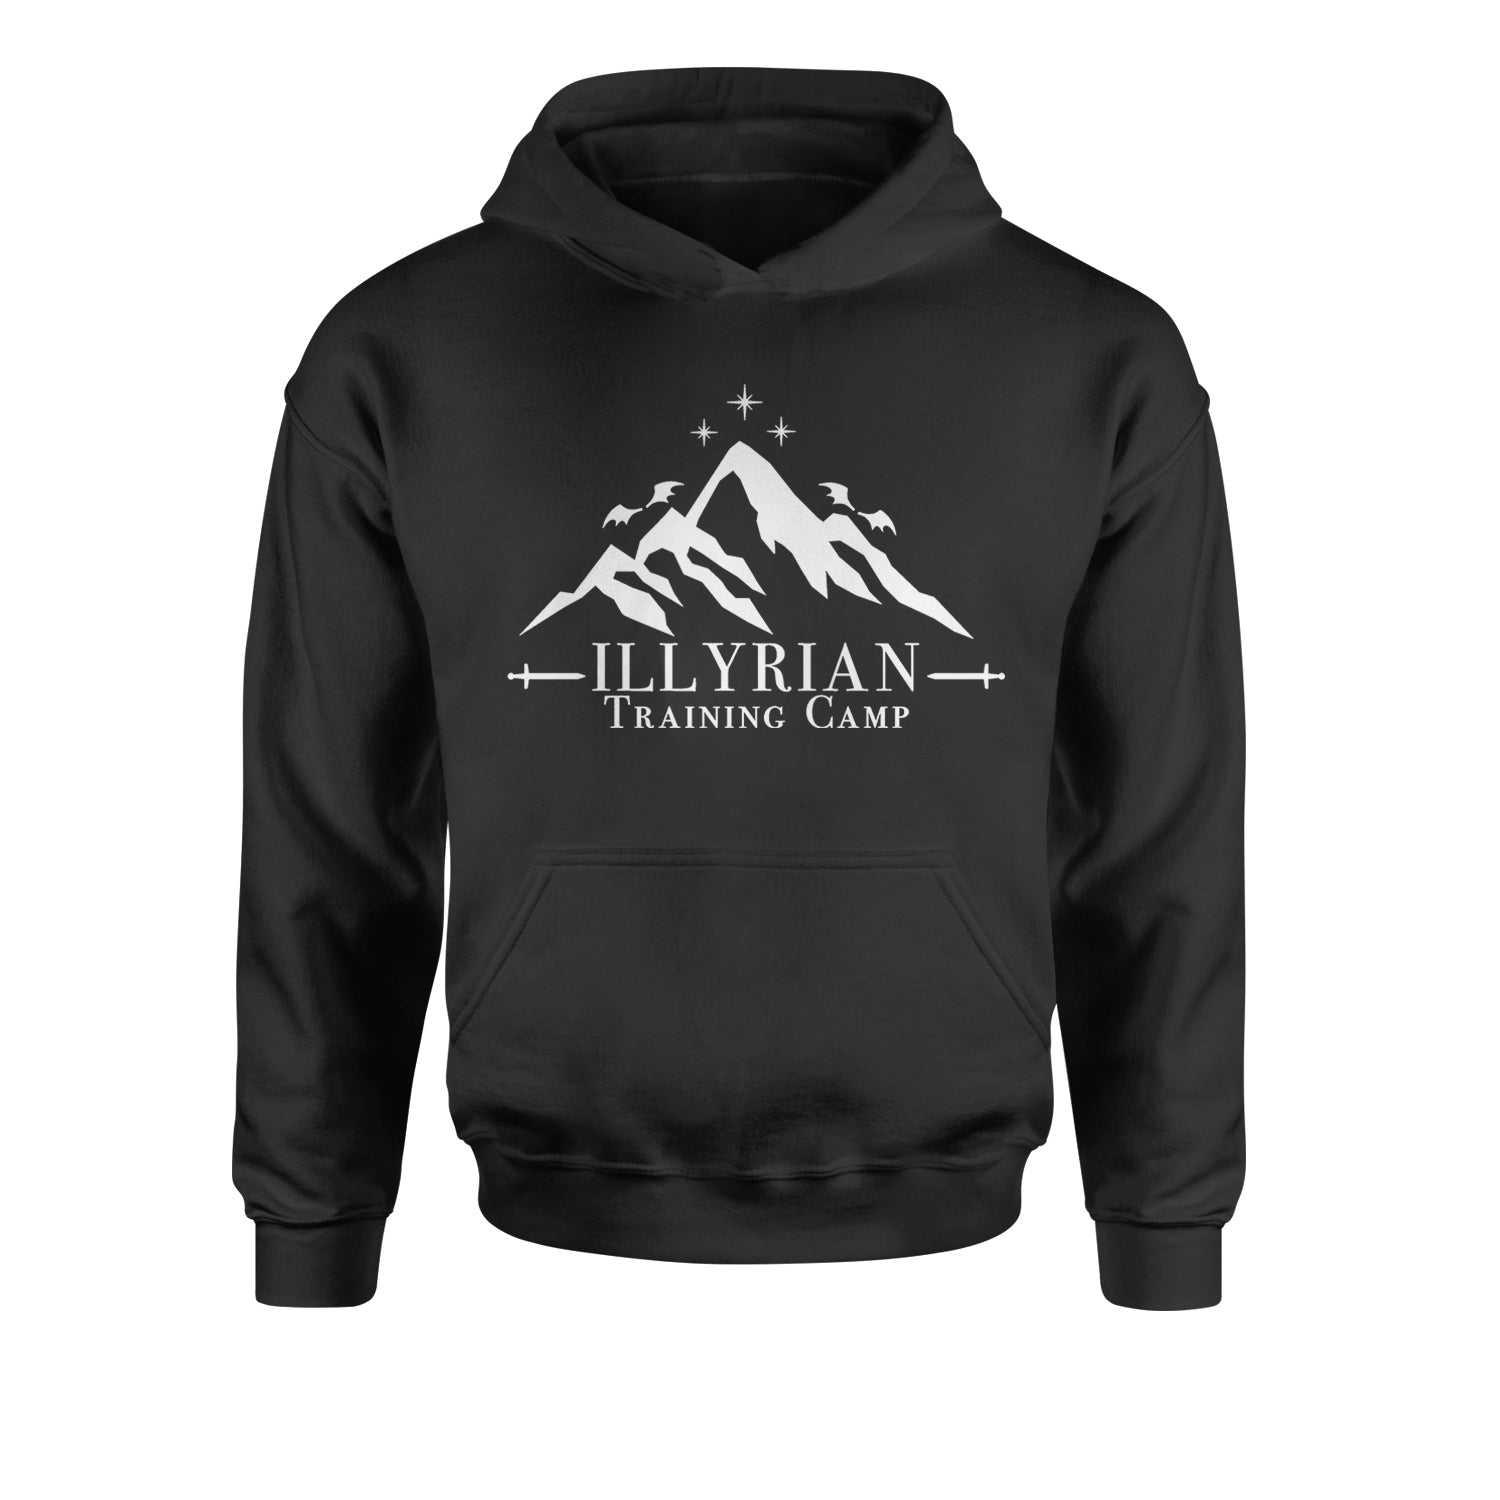 Illyrian Training Camp Night Court Youth-Sized Hoodie